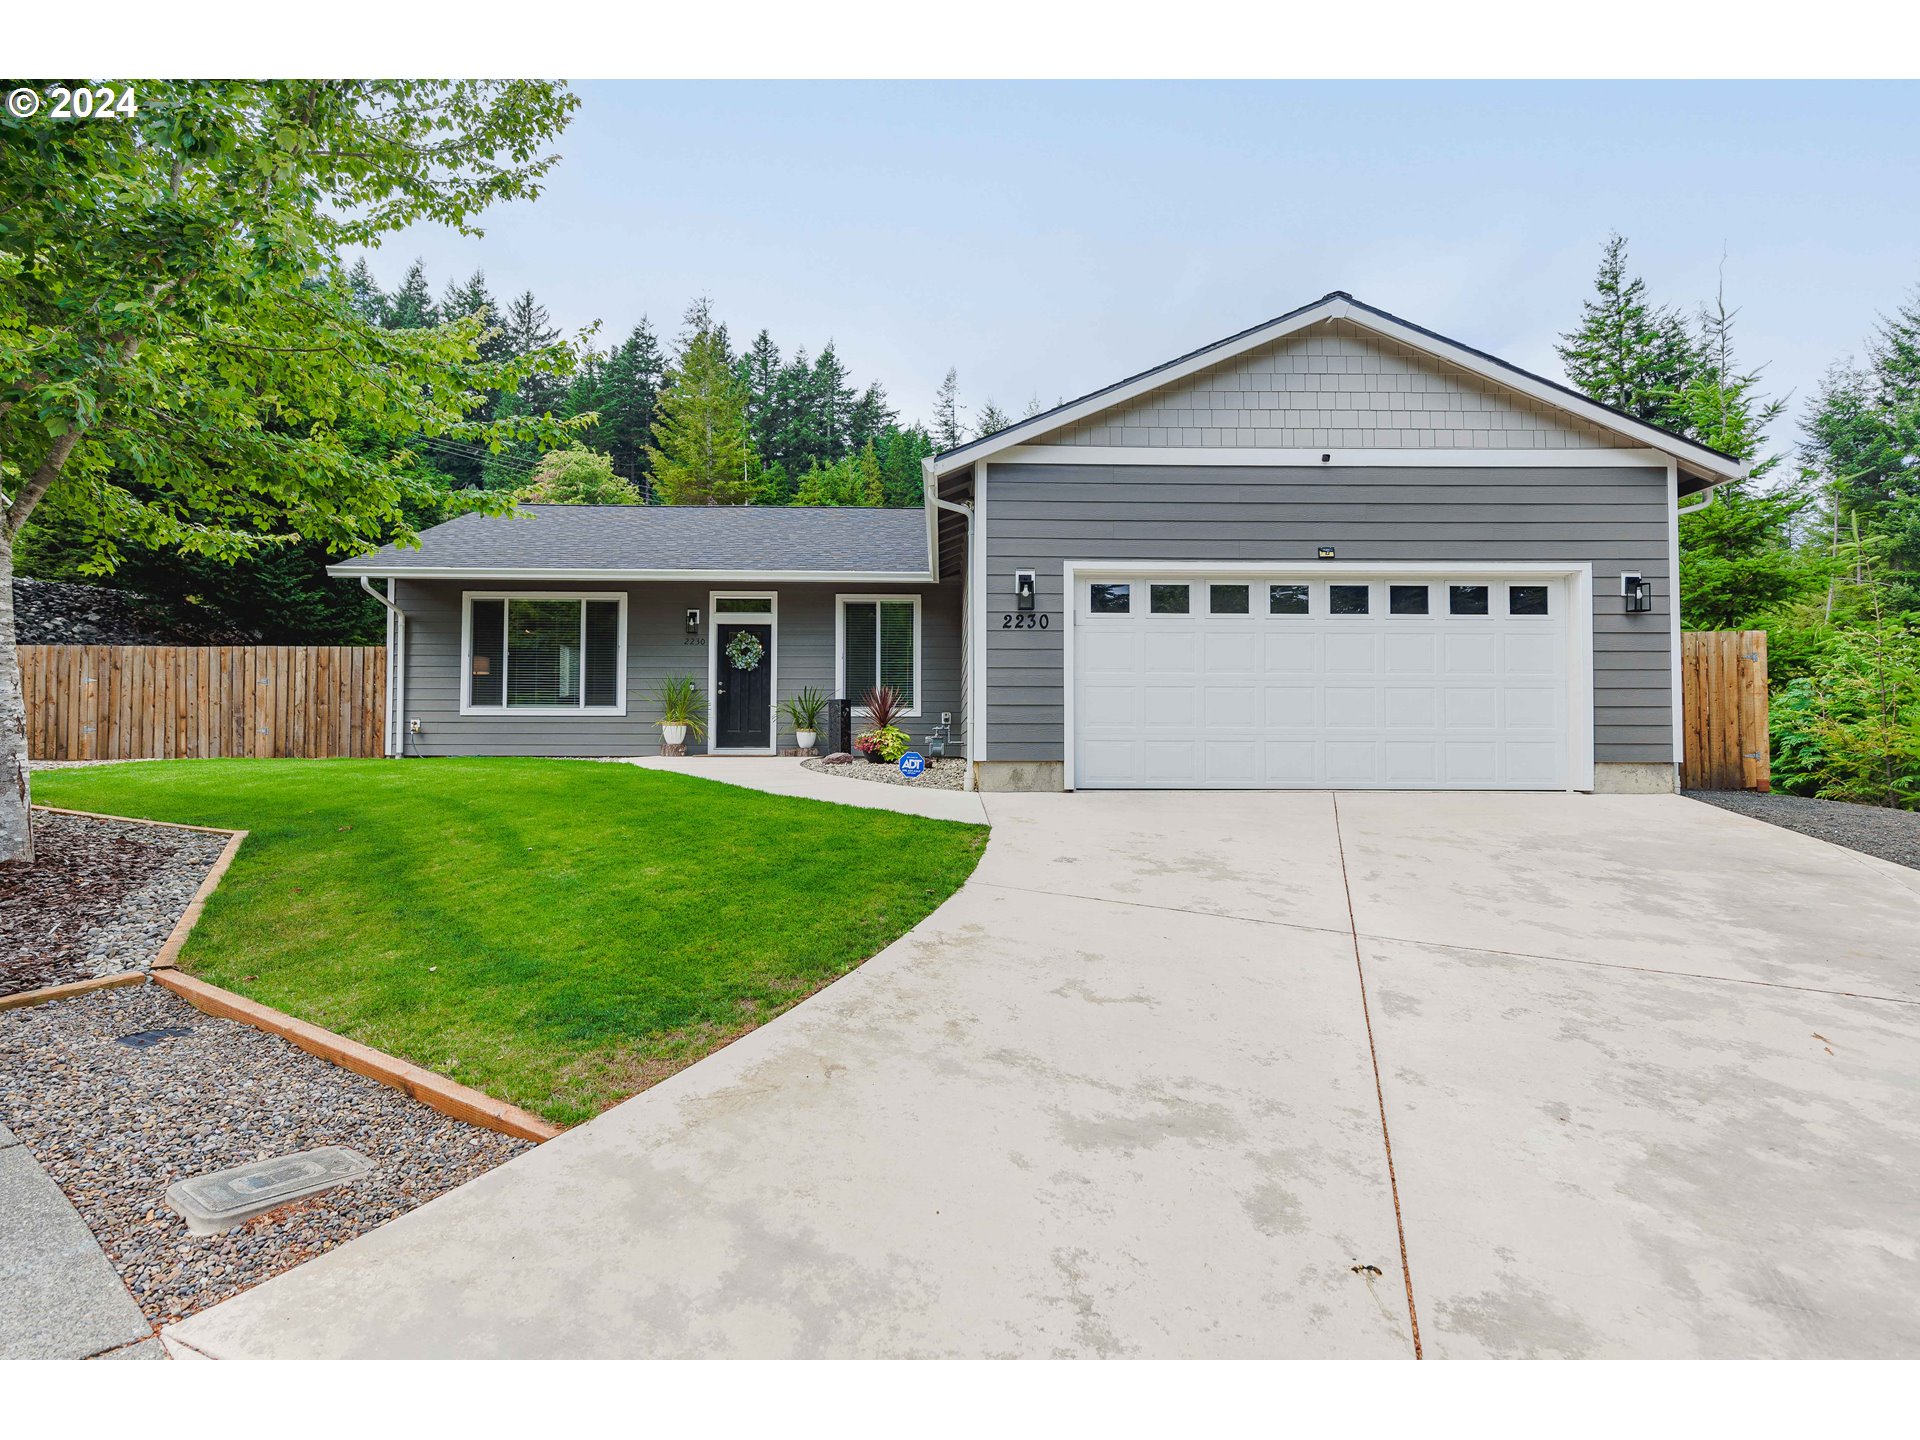 2230 TIMBERLINE DR, Coos Bay, OR 97420